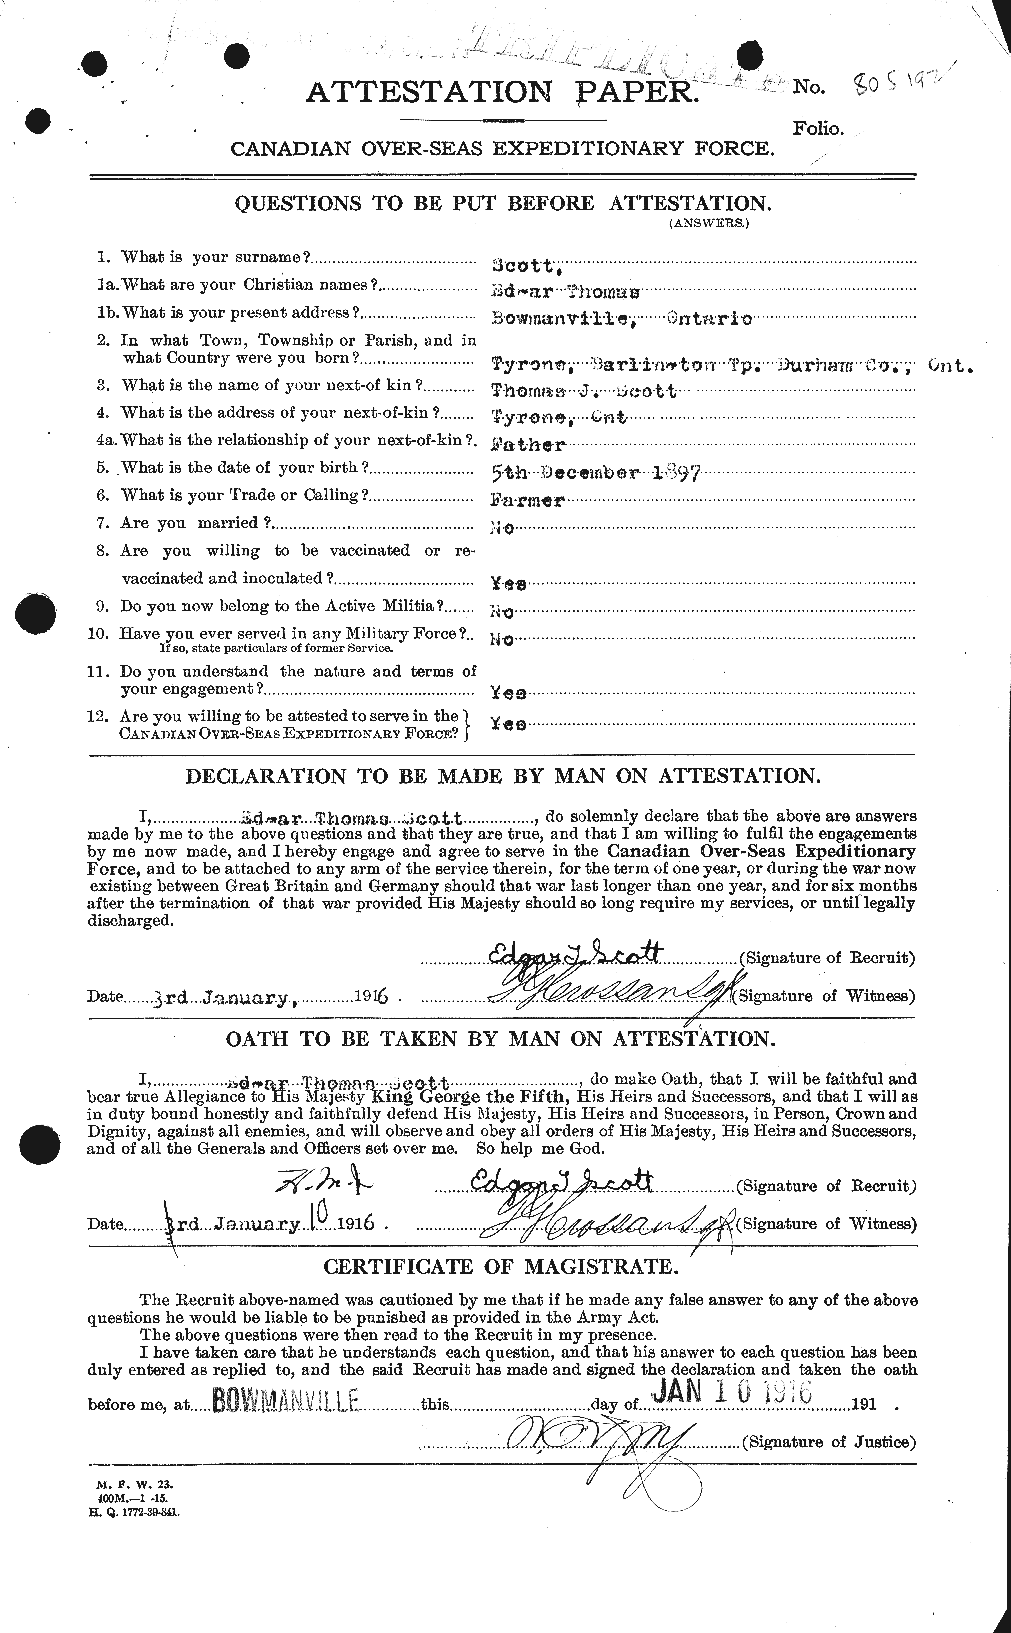 Personnel Records of the First World War - CEF 085335a